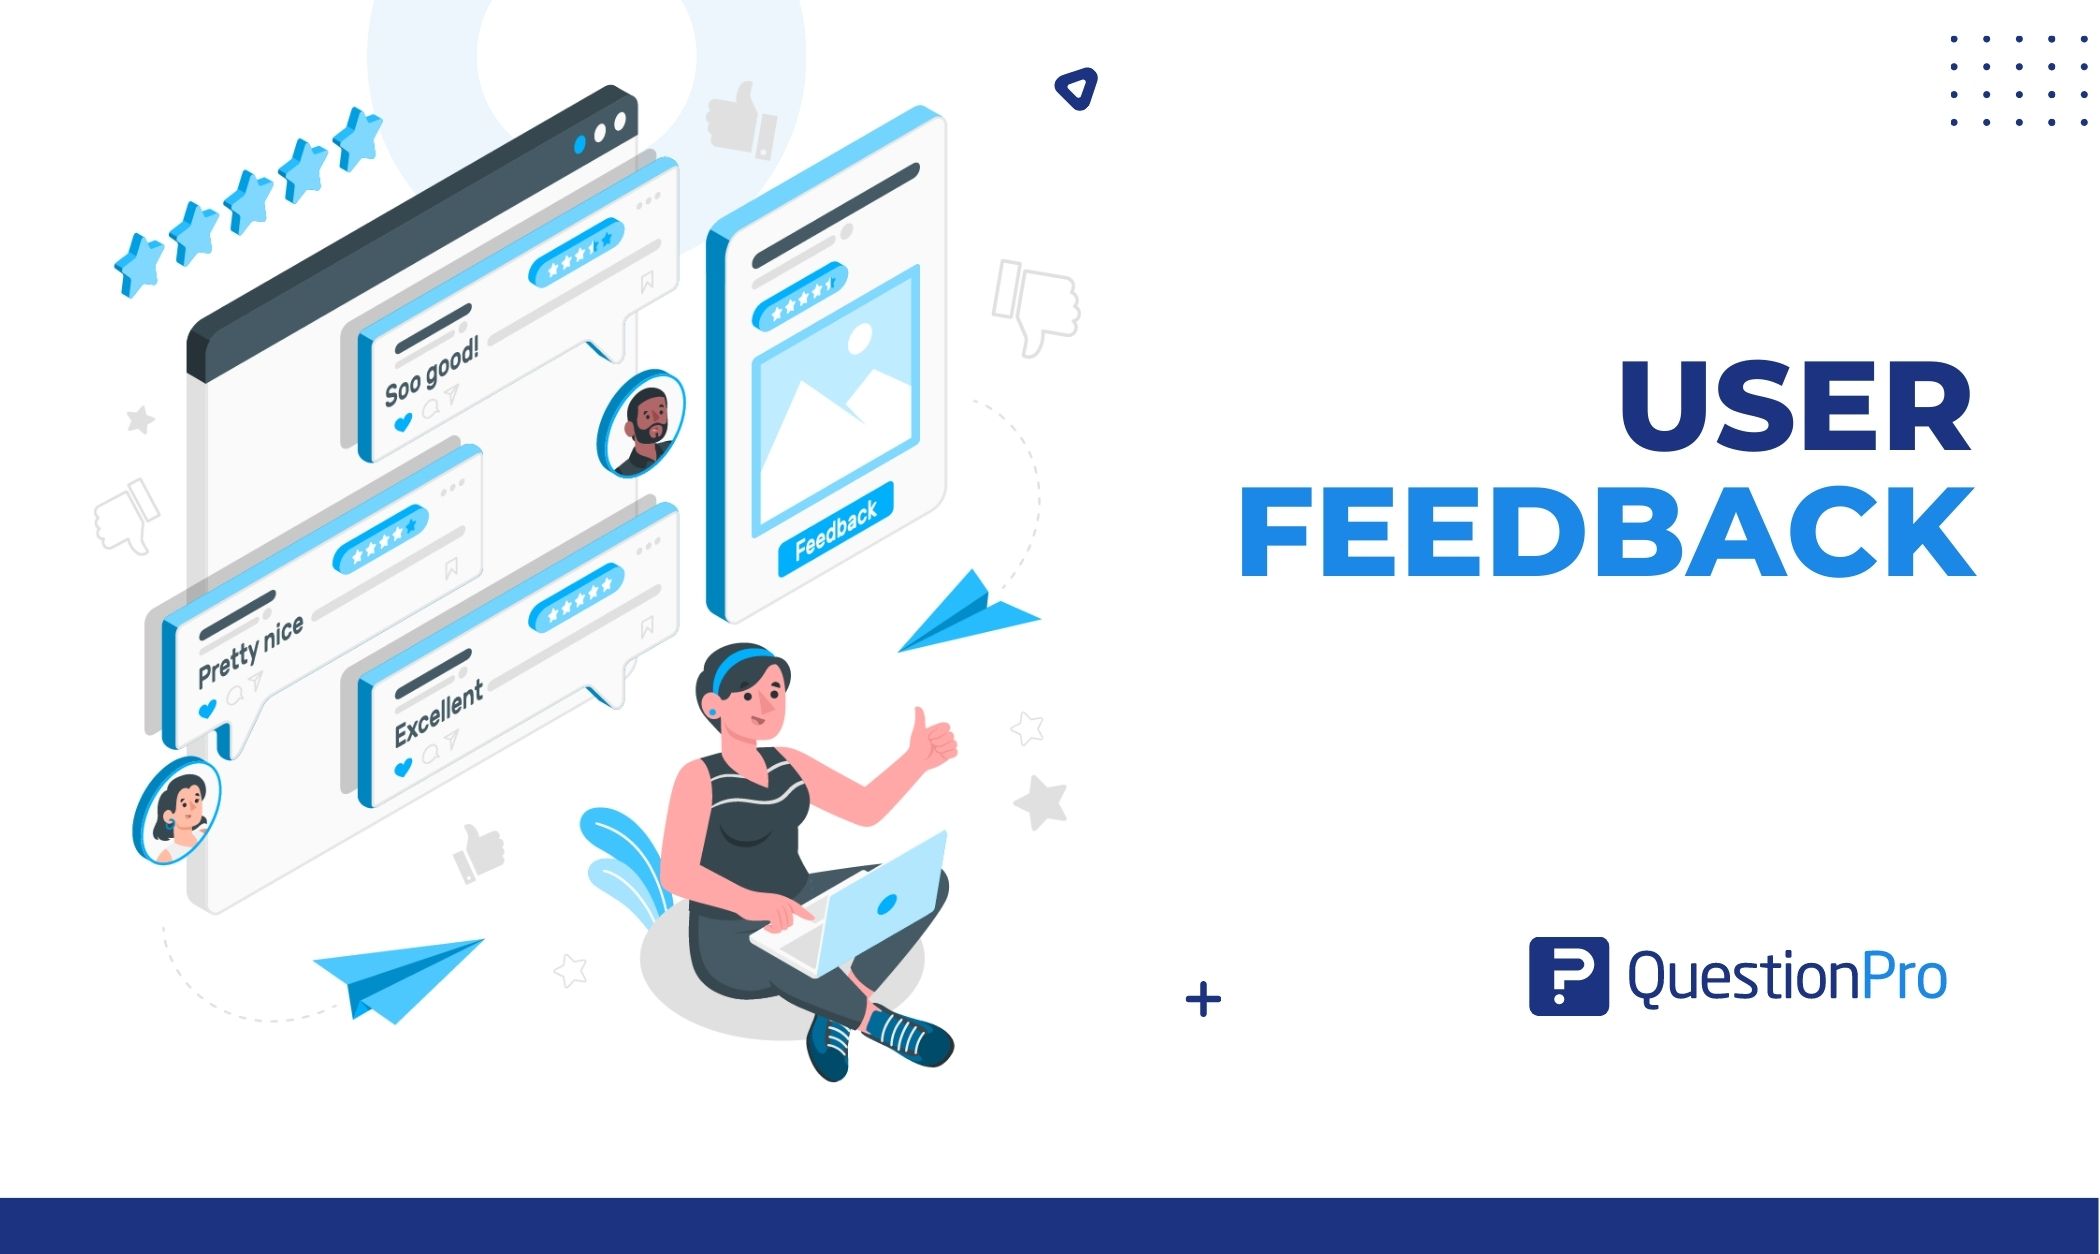 User feedback is the customer experience data from your website, mobile app, or email marketing. It's about customer satisfaction with you.